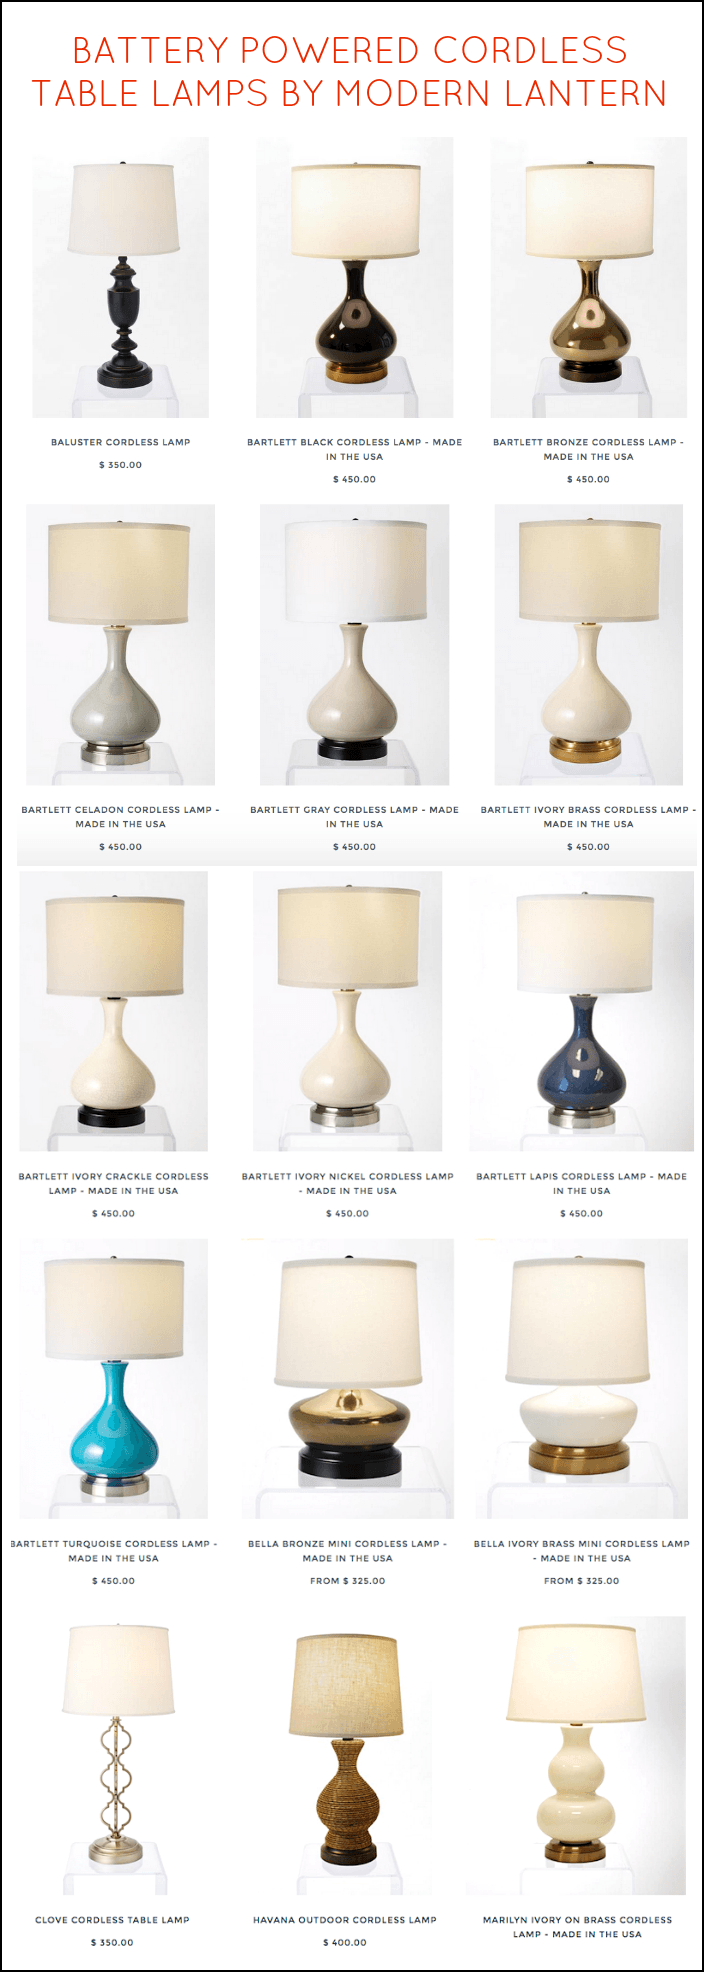 fabulous cordless table lamps by Modern Vintage - battery operated